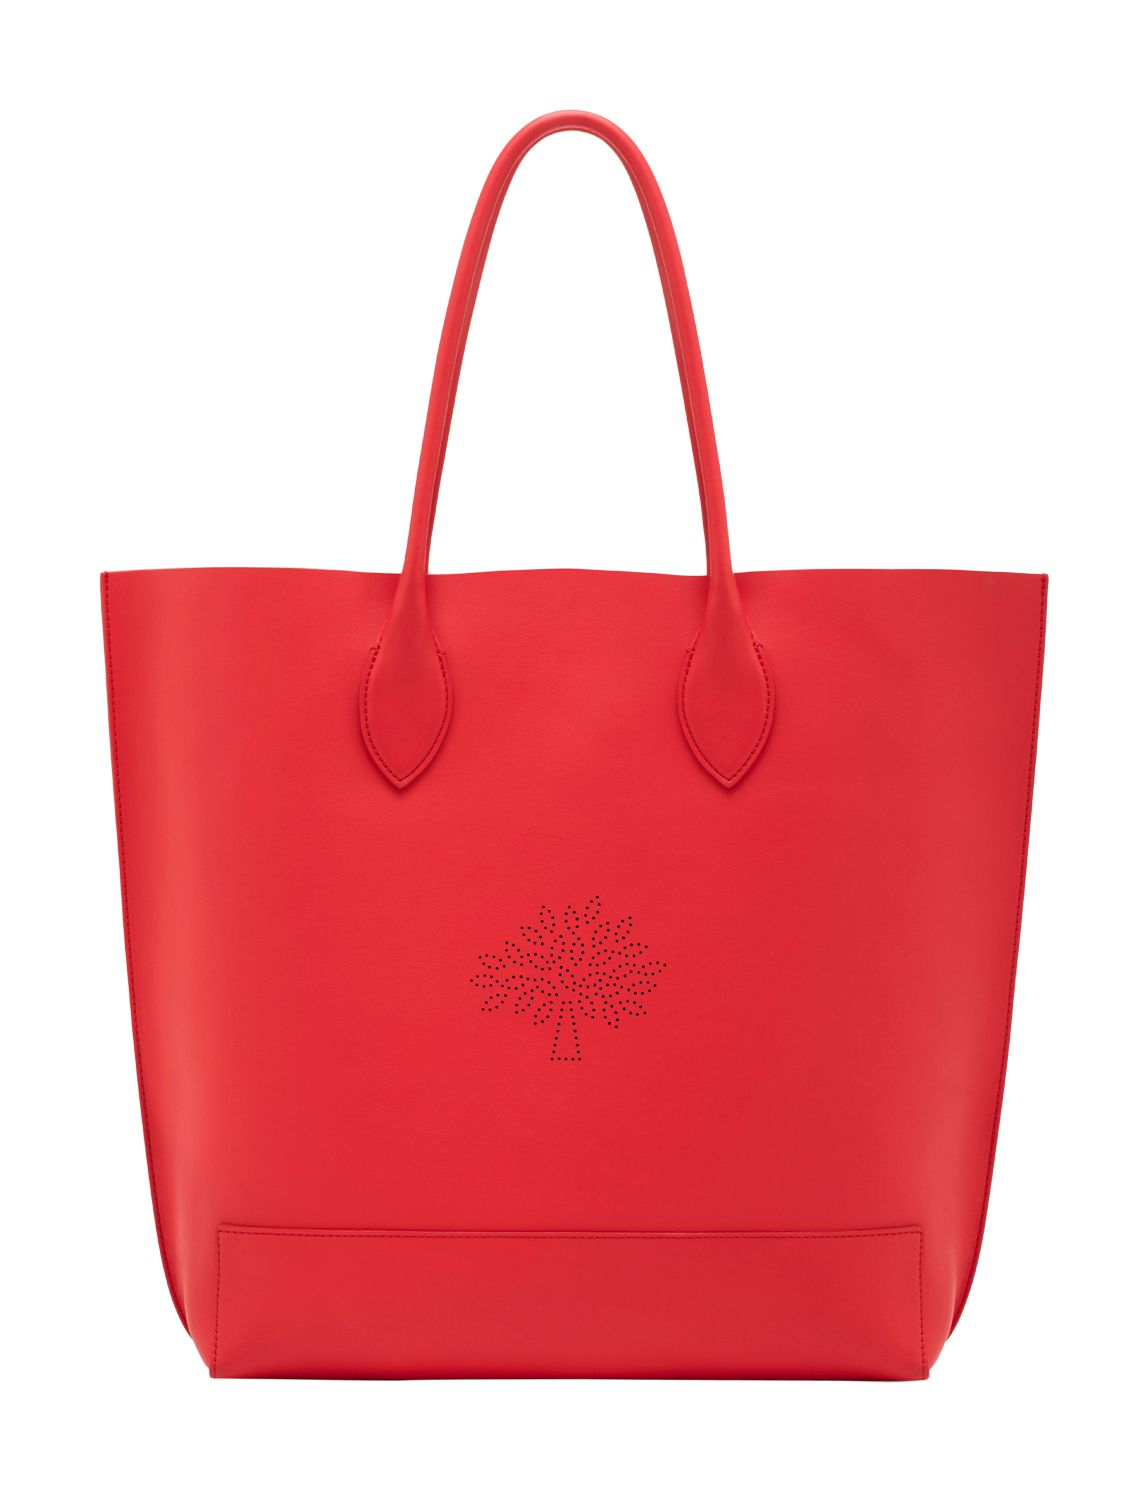 Mulberry Blossom Nappa Leather Tote Bag in Red - Lyst